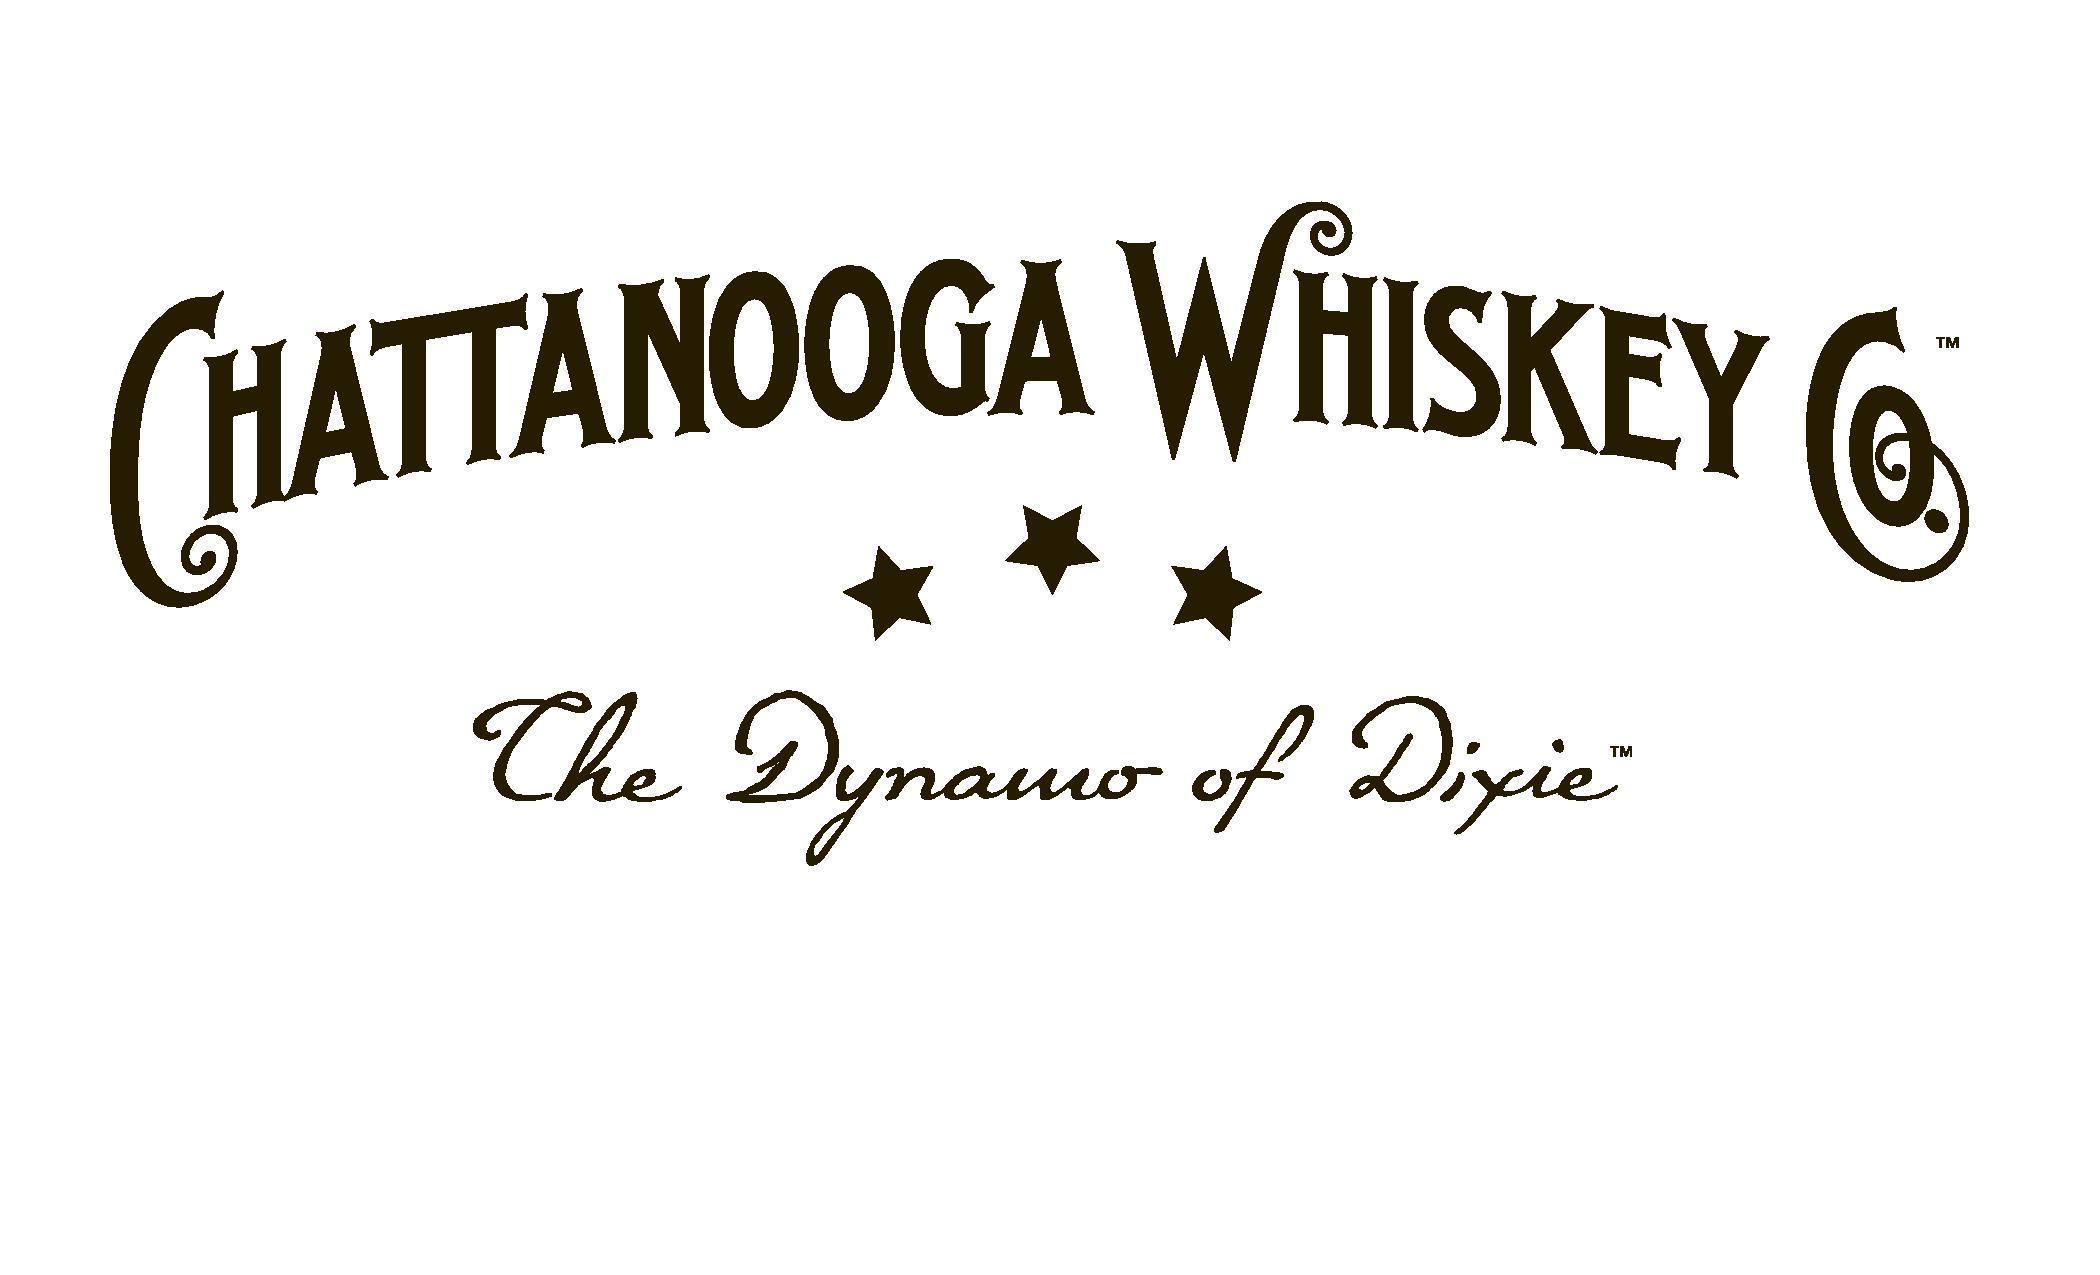 Examiner.com Logo - Whiskey is brewing in Chattanooga after 100 year dry spell